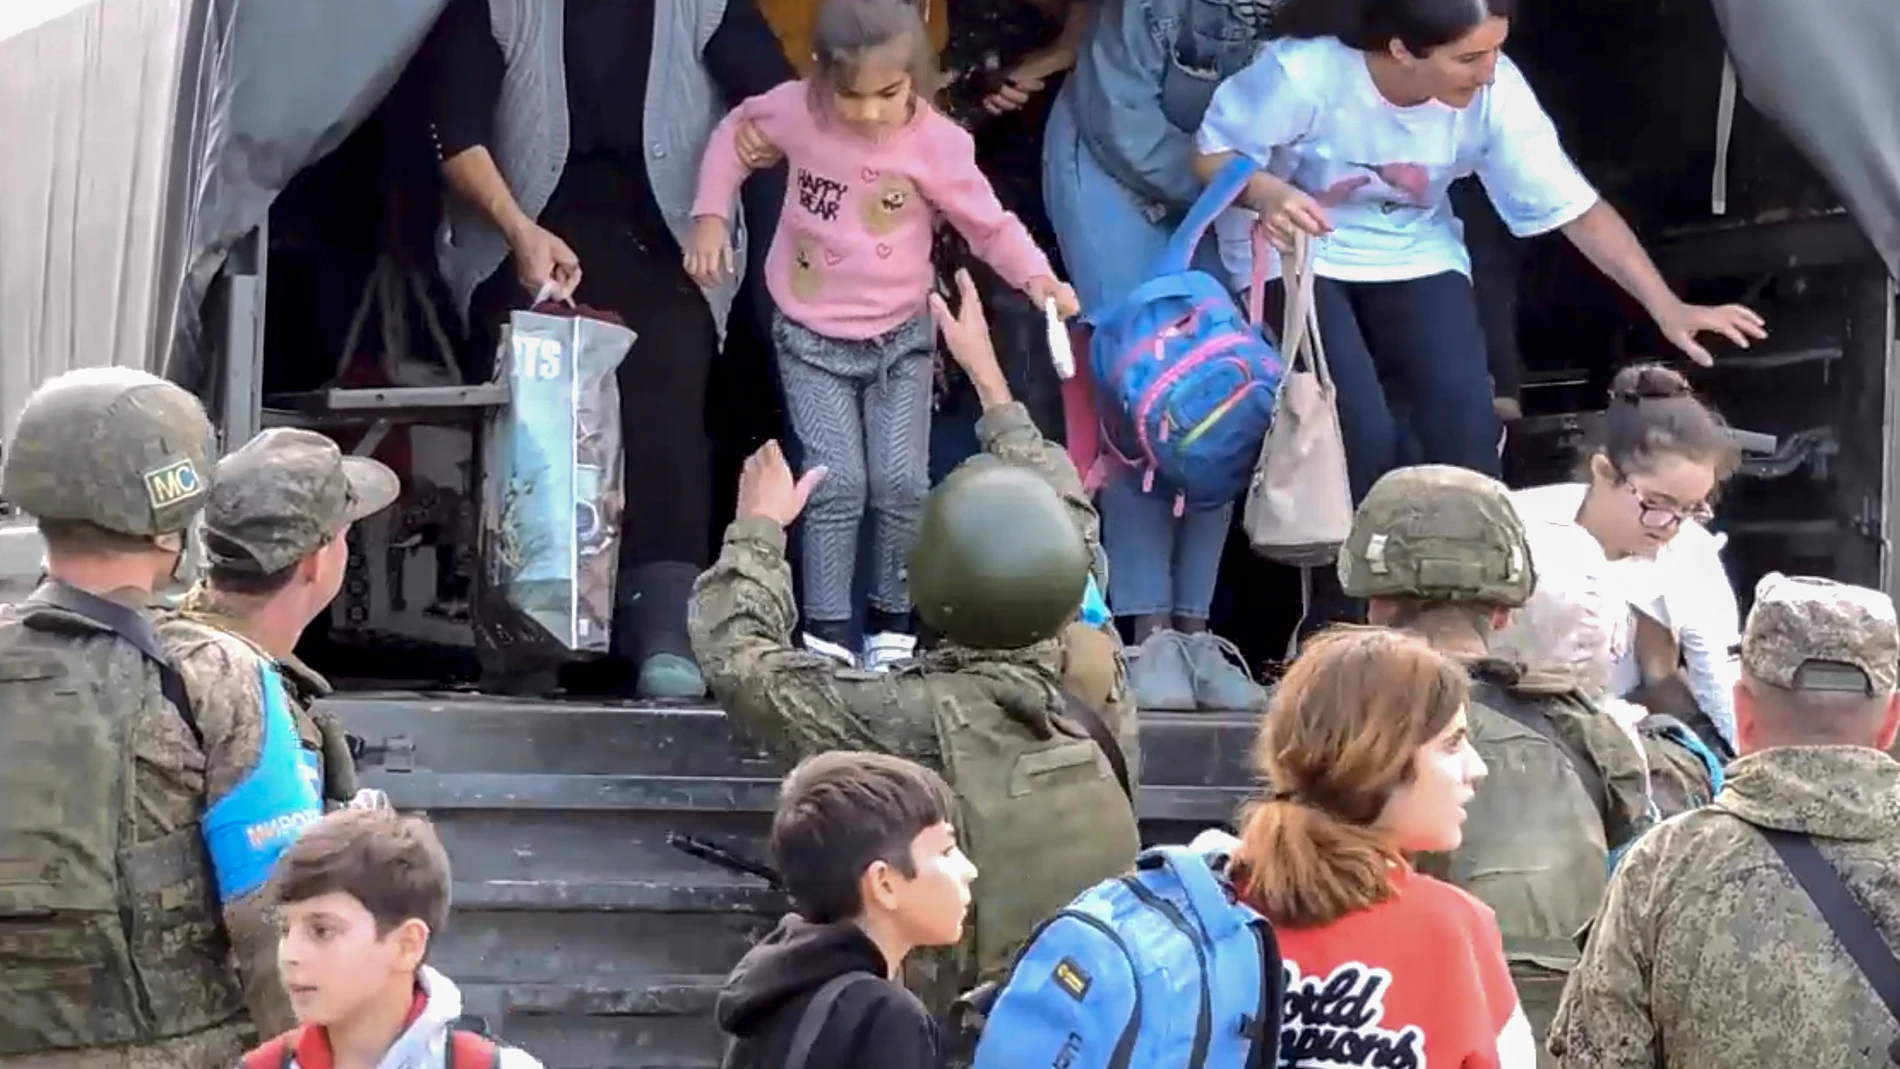 Zzz (Azerbaijan), 20/09/2023.- A still image taken from a handout video provided by the Russian Defence Ministry press-service shows Russian peacekeepers evacuating civilians at an undisclosed location in Nagorno-Karabakh, 20 September 2023. More than two thousand civilians, including 1,049 children, were evacuated from the 'most dangerous areas' of Nagorno-Karabakh, the Russian ministry said. Azerbaijan's Ministry of Defense announced on 20 September that it agreed to a proposal for a ceasef...